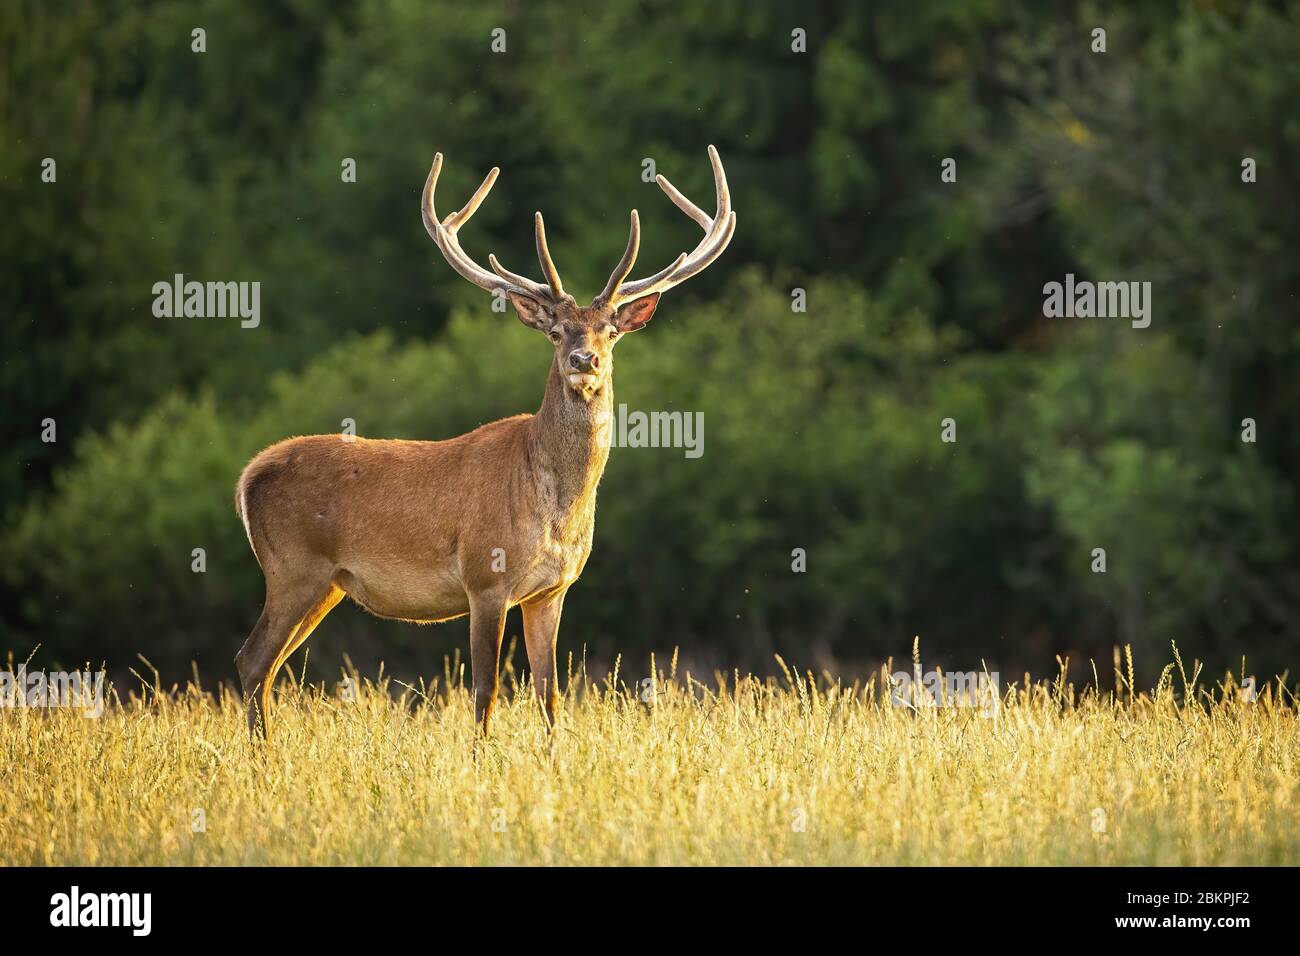 Sunlit red deer stag with new antlers growing facing camera in summer nature Stock Photo